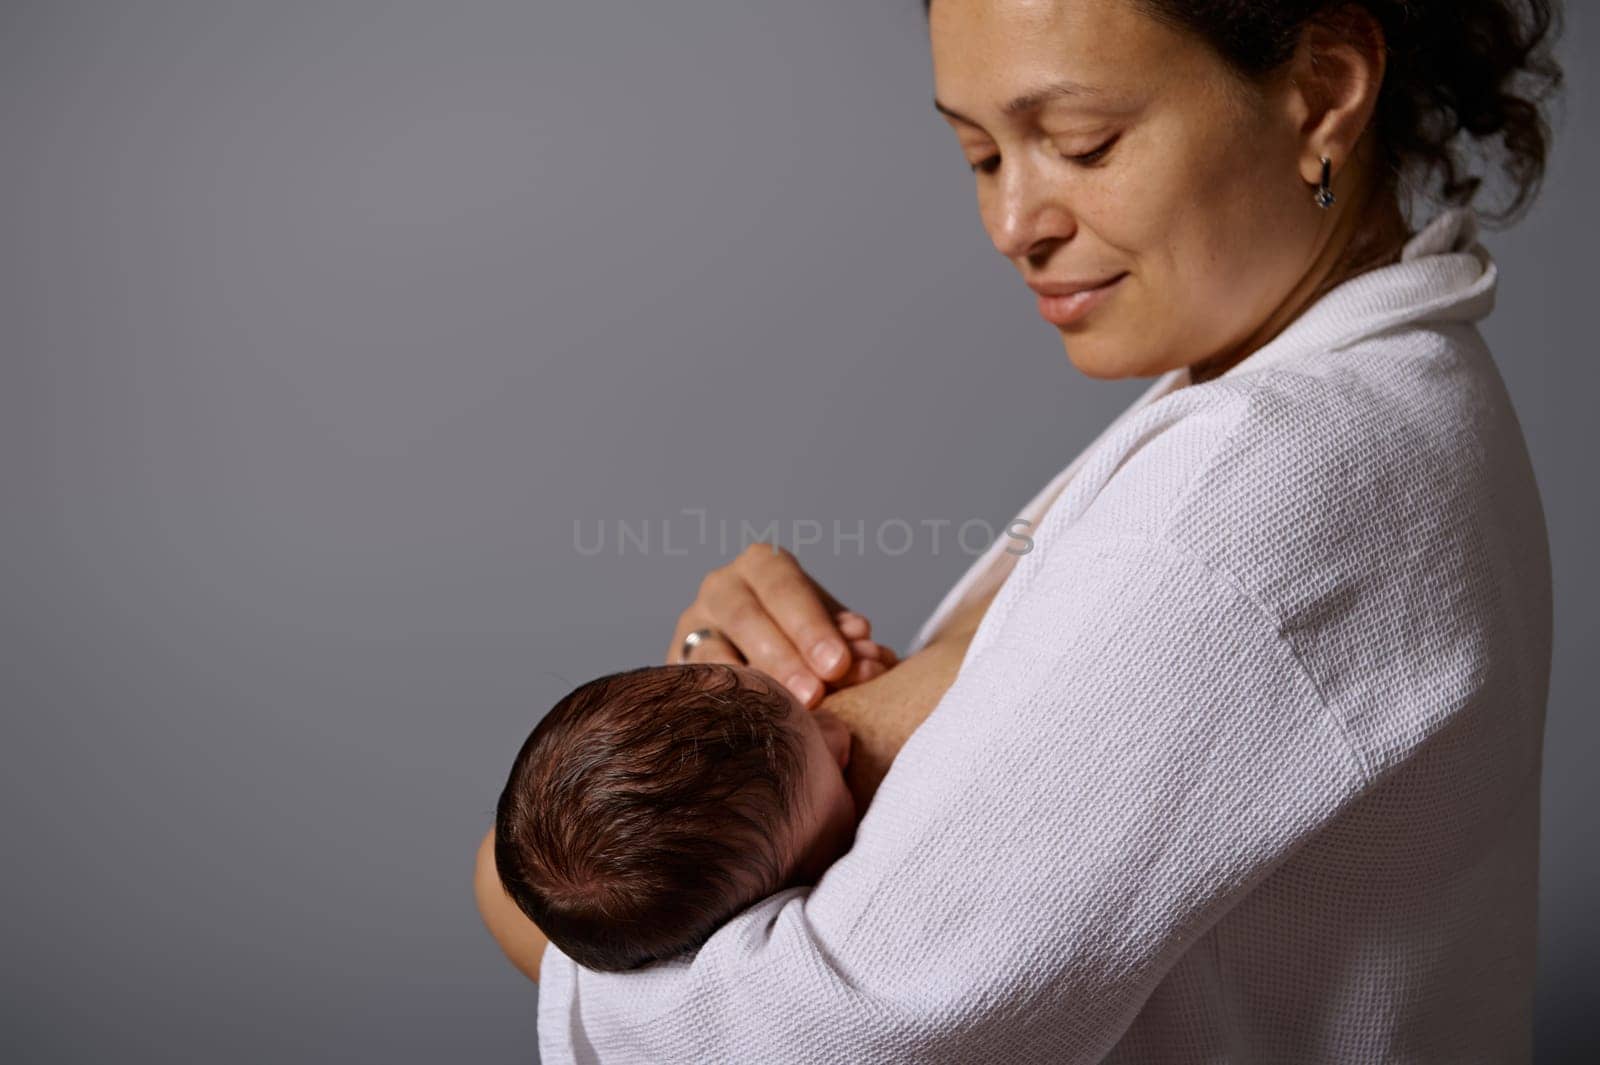 Close-up portrait of a happy woman, young mother breastfeeding her newborn baby, isolated over gray studio background by artgf